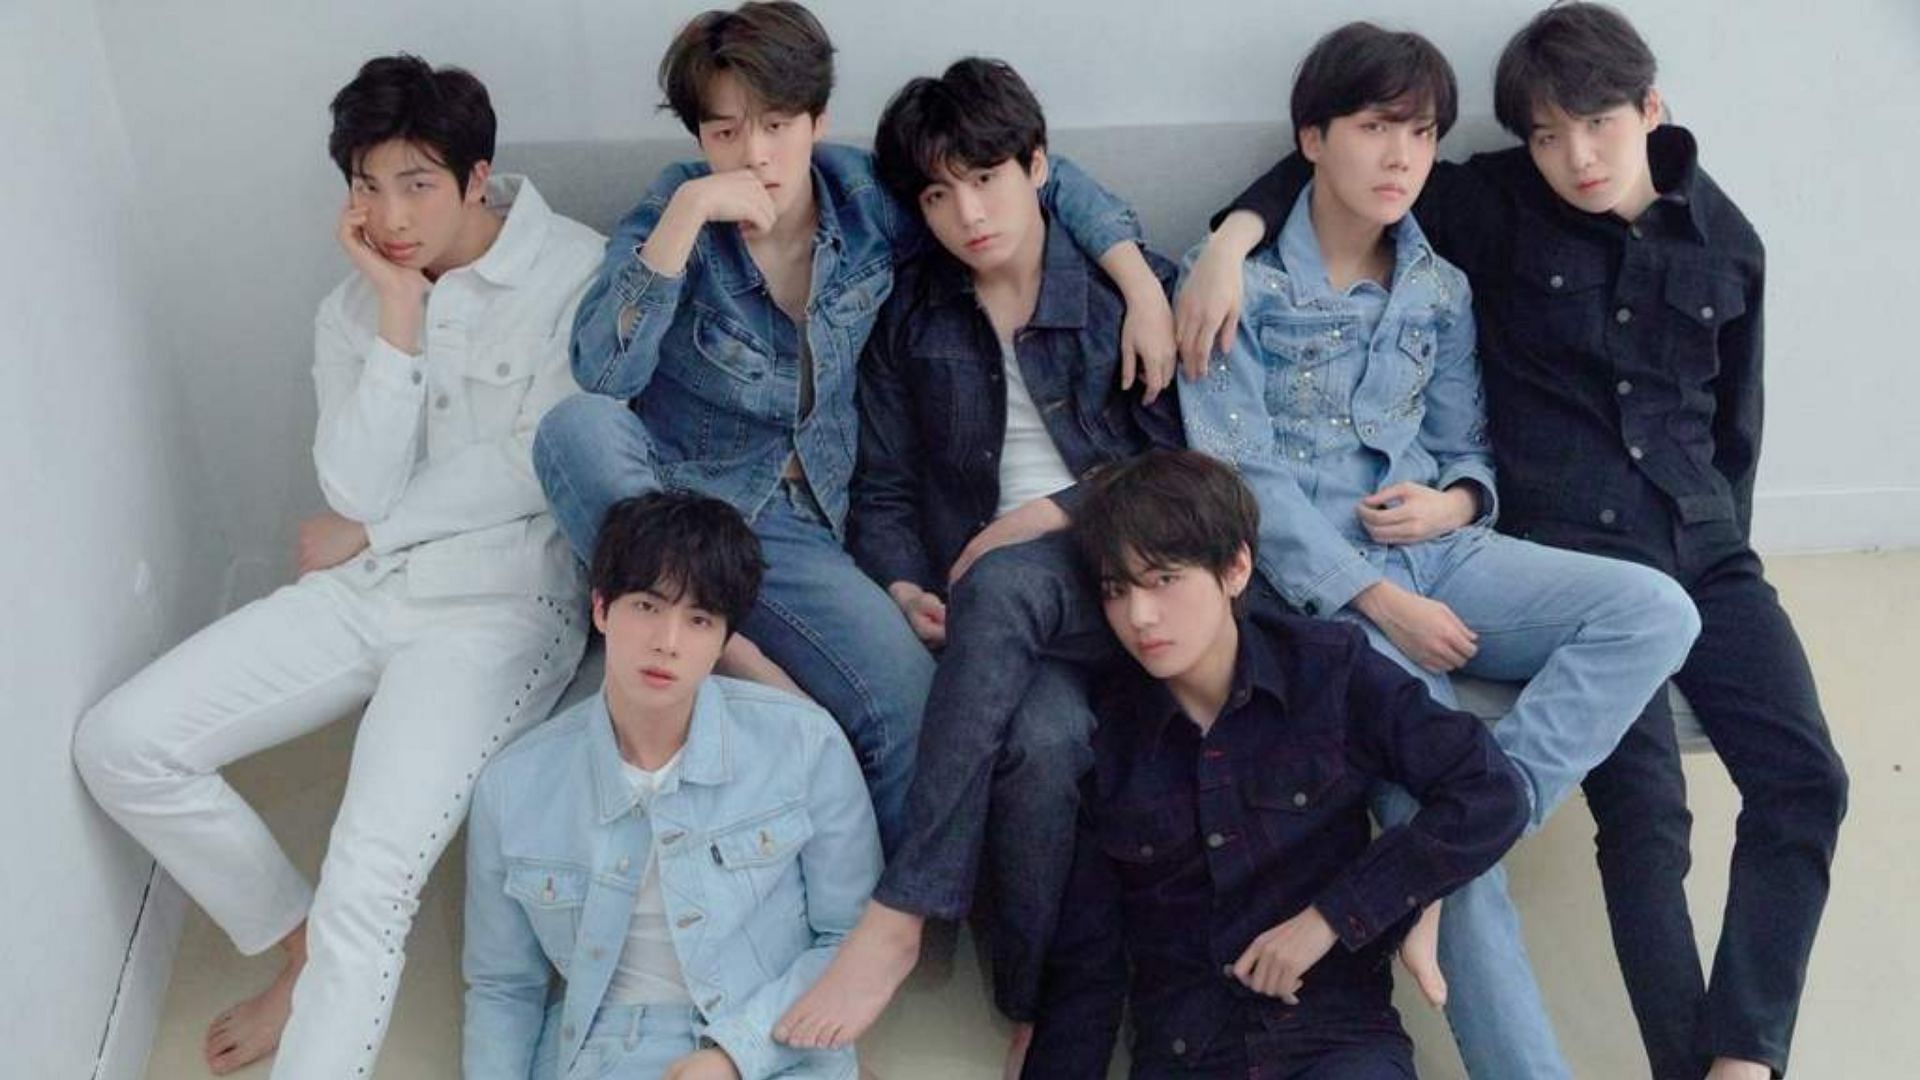 BTS members pose for a concept photo (Image via BIG HIT MUSIC)